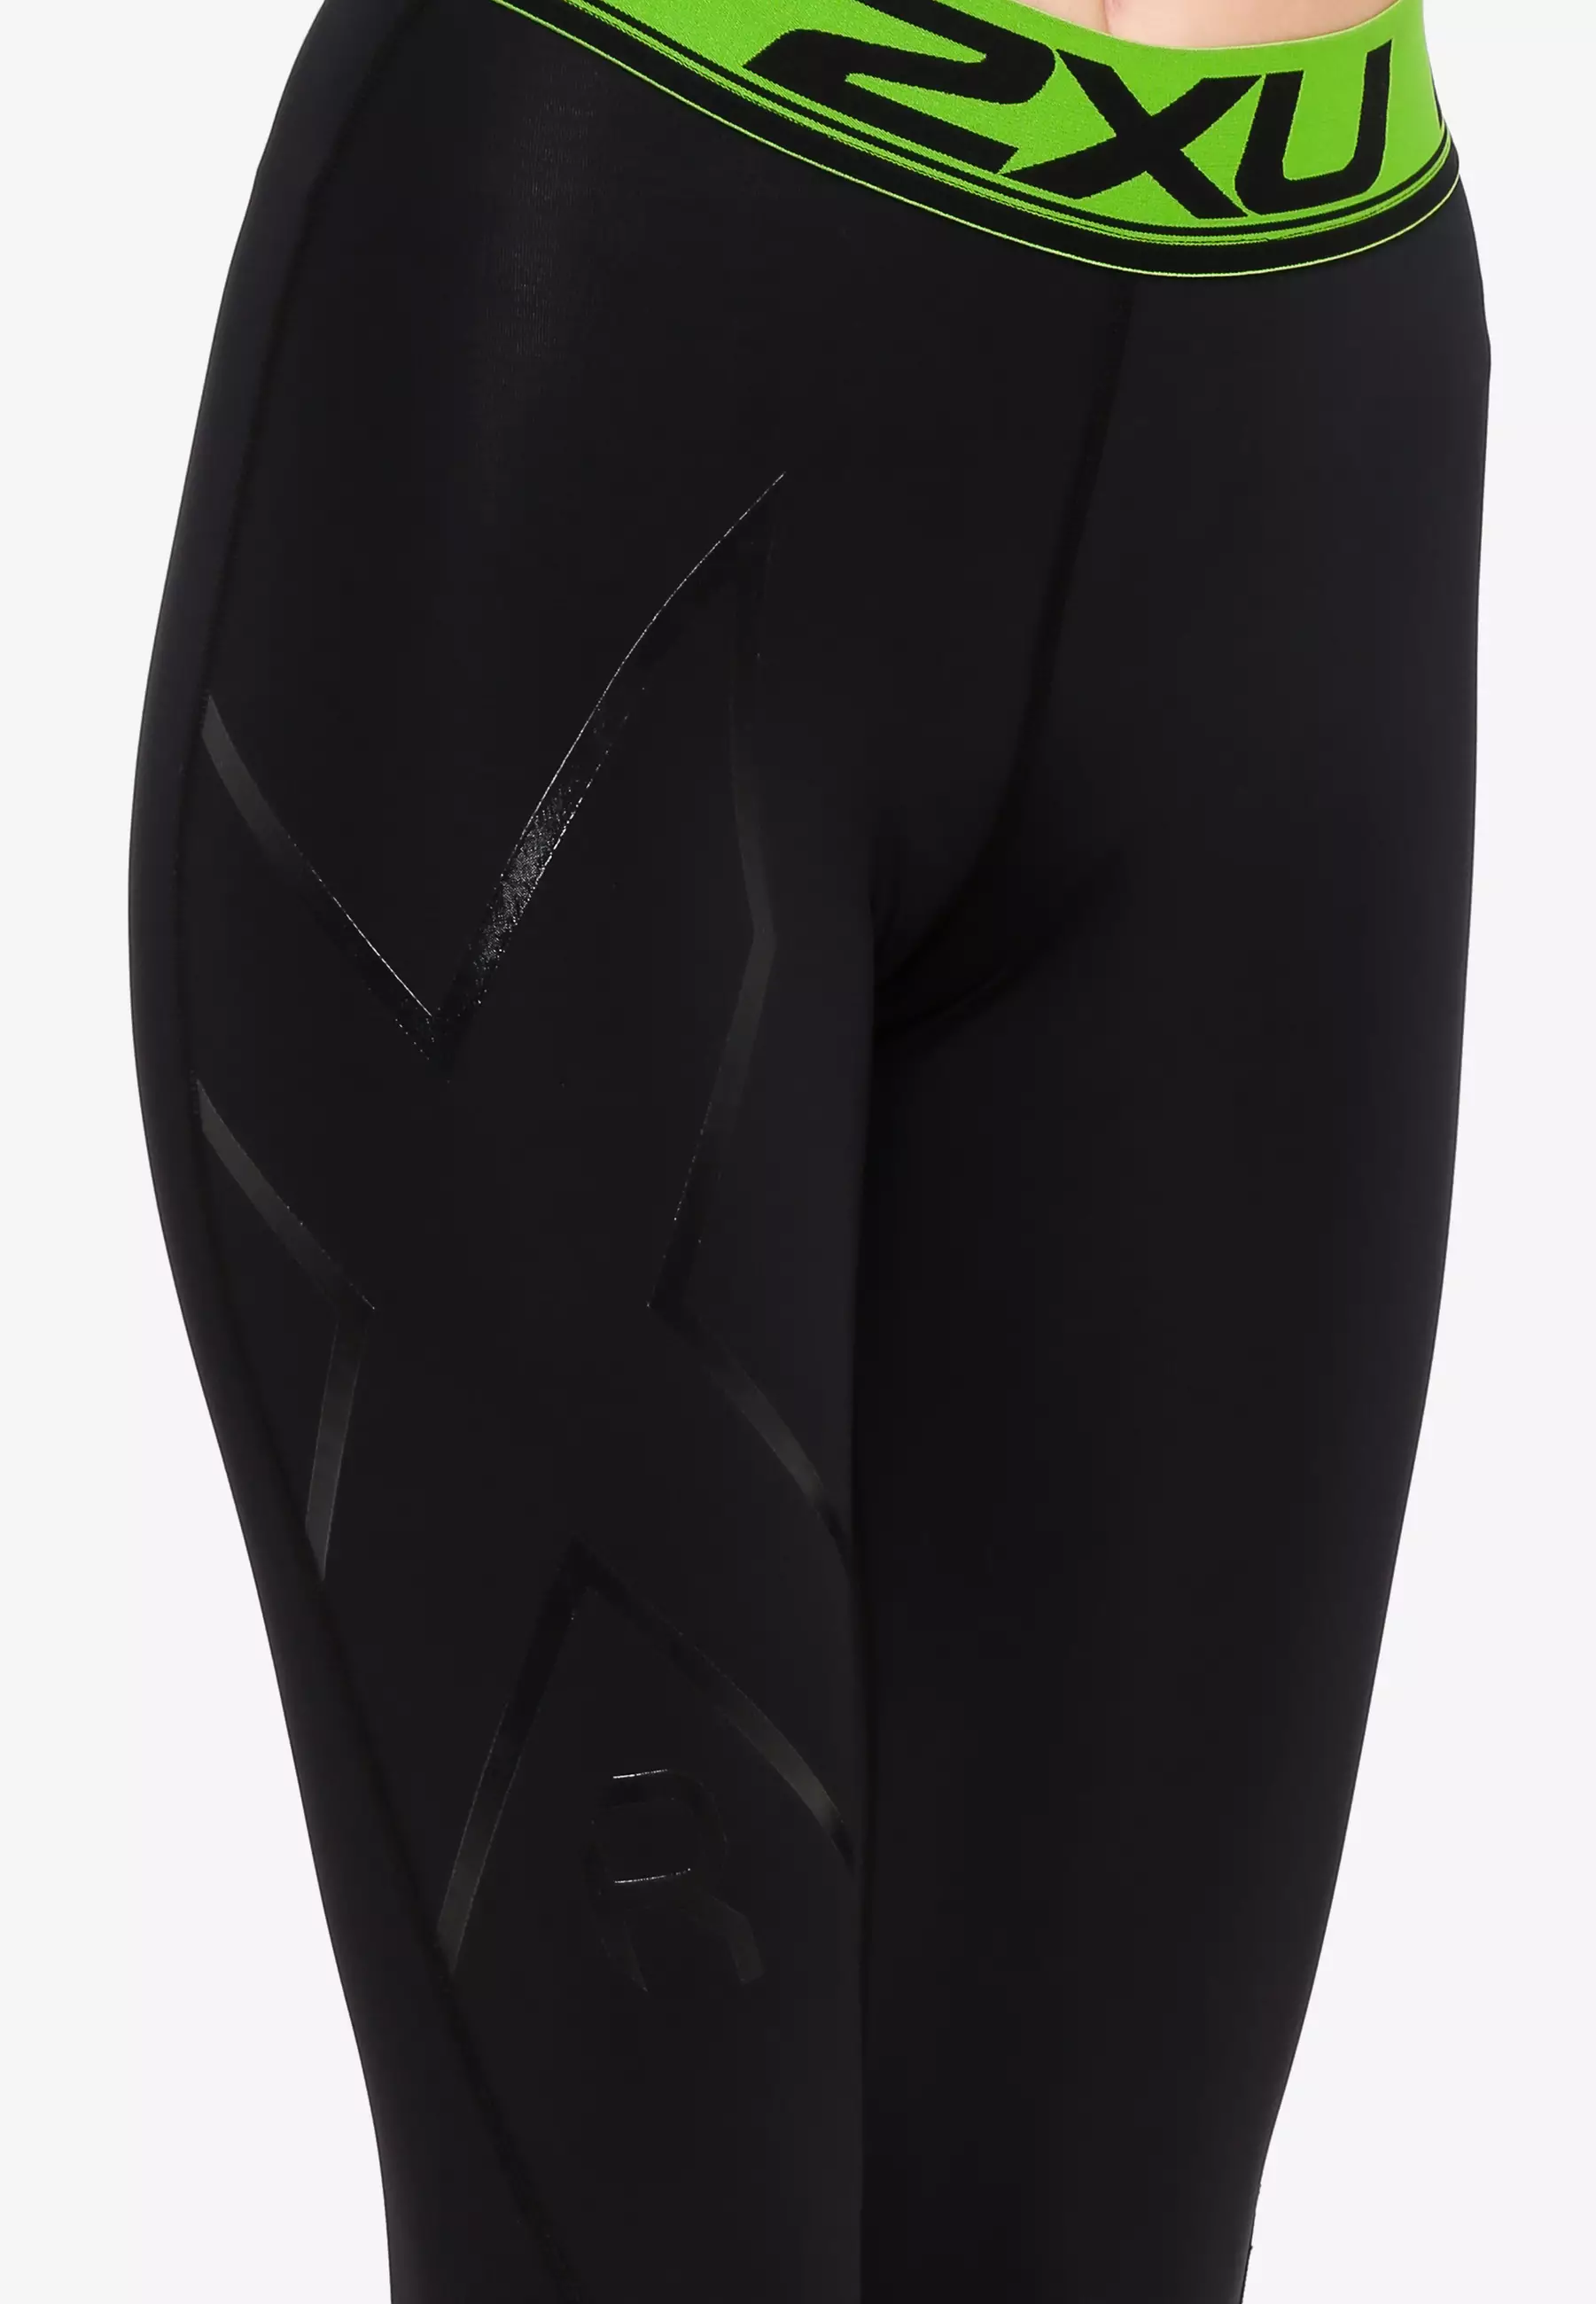 2XU Refresh Recovery Compression Tights - Men's - Clothing